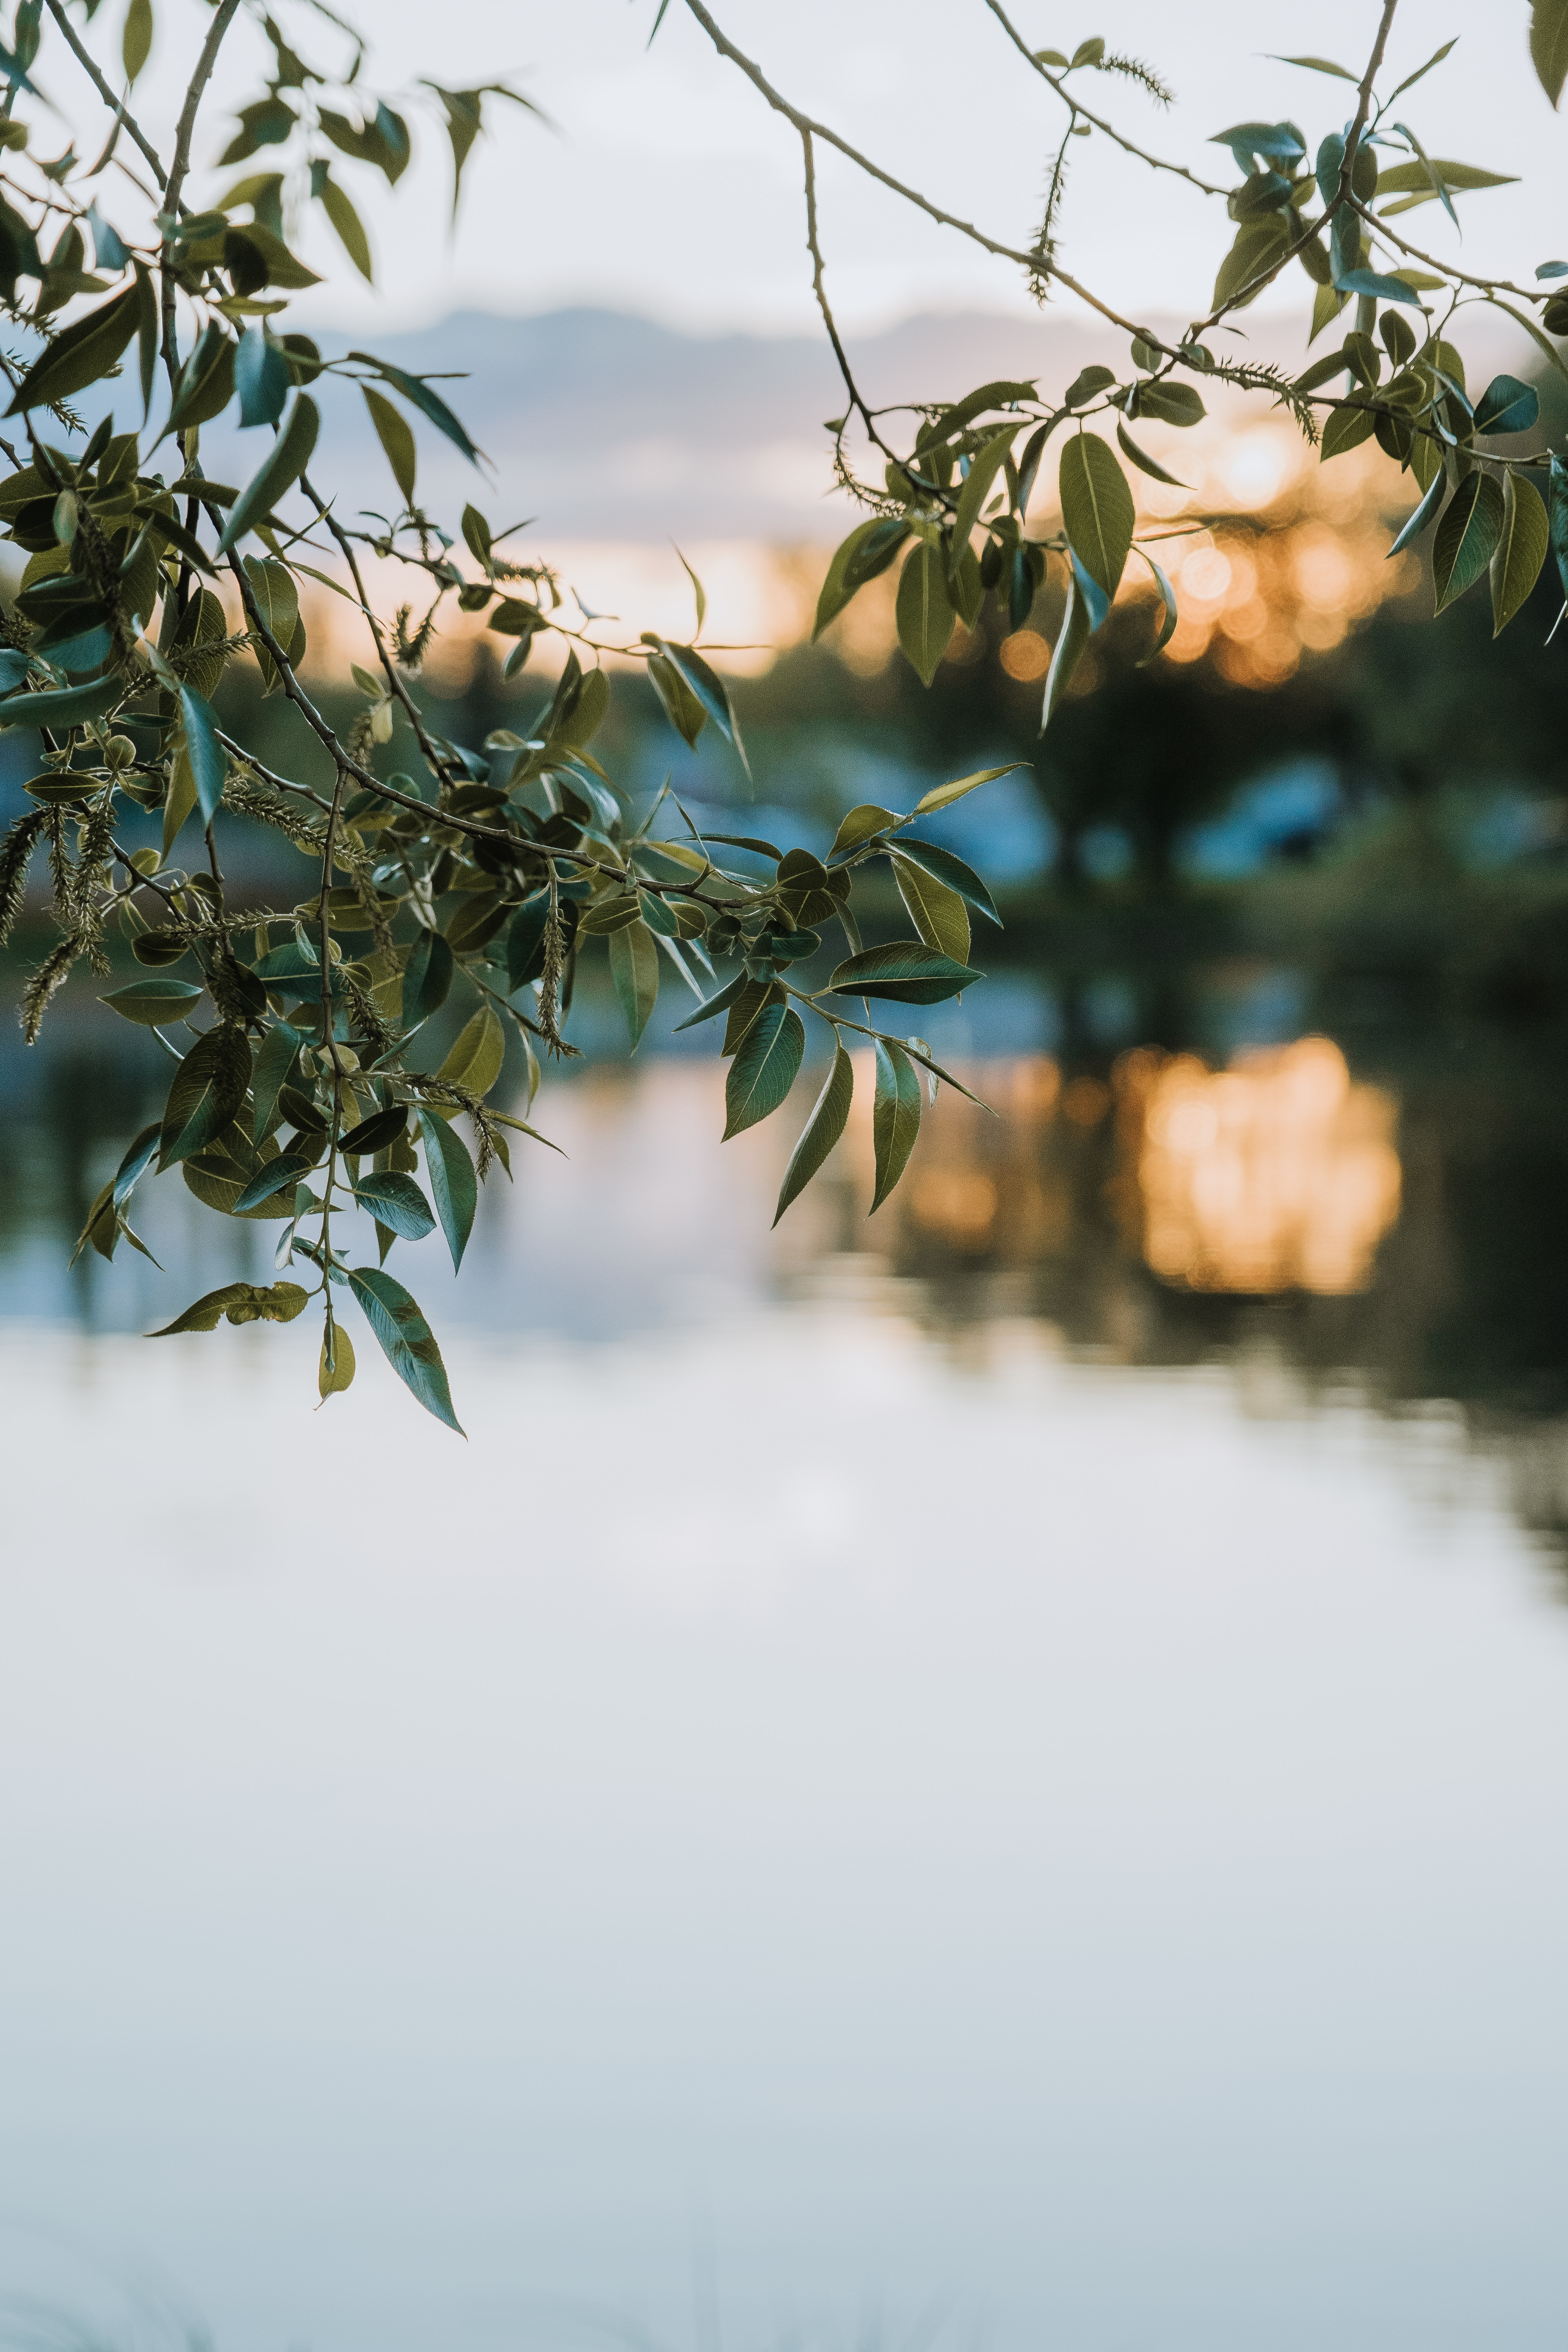 Free HD blur, smooth, nature, leaves, lake, branches